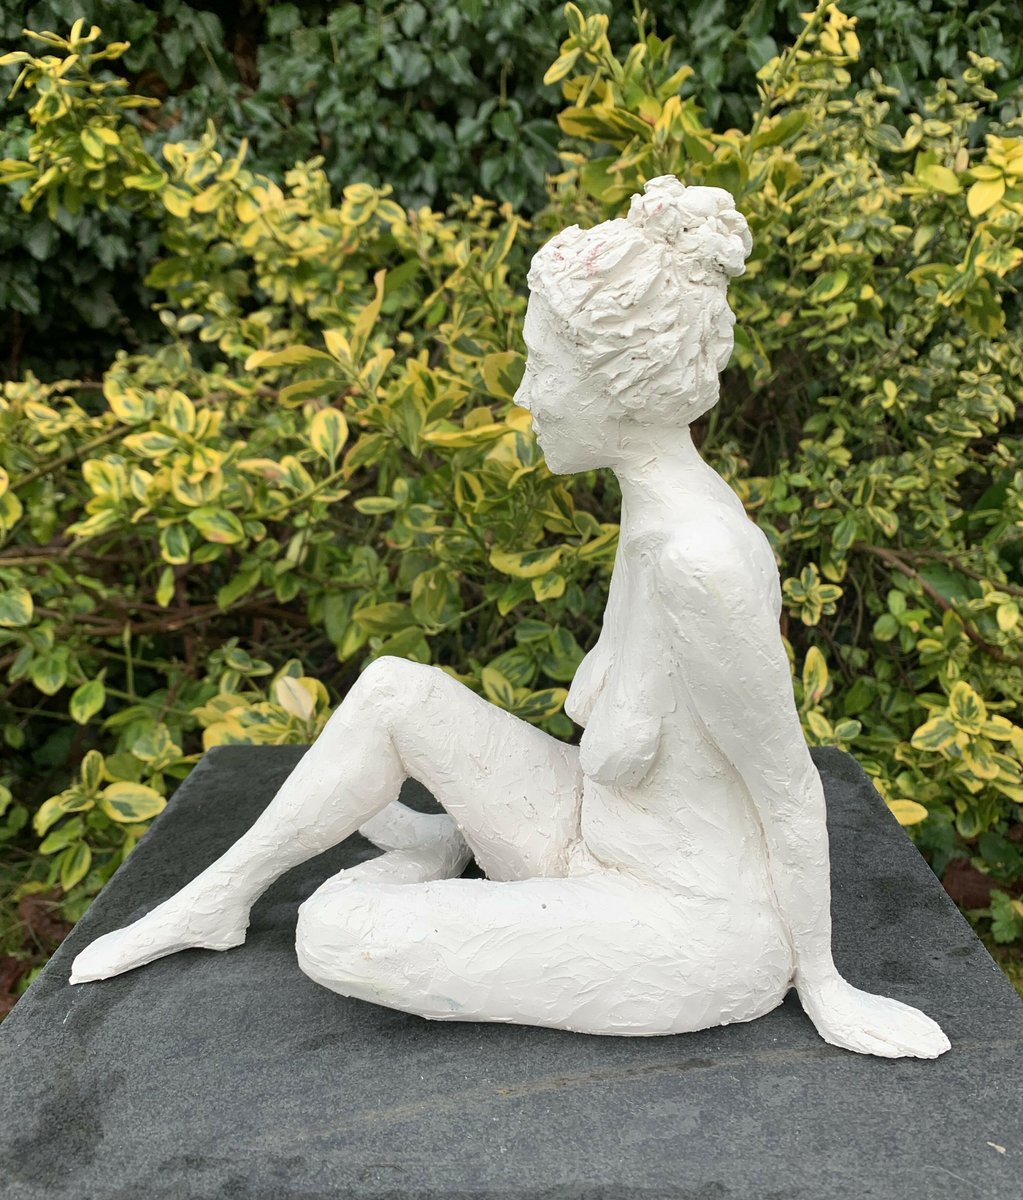 Today’s 'Pic of the Day' is by sculptor Amanda Moser (Artweeks listing 398; artweeks.org/v/amanda-moser), showing at Christmas Common near Watlington in South Oxfordshire week of the festival (18th-27th May). See more great art and plan venues to visit at artweeks.org